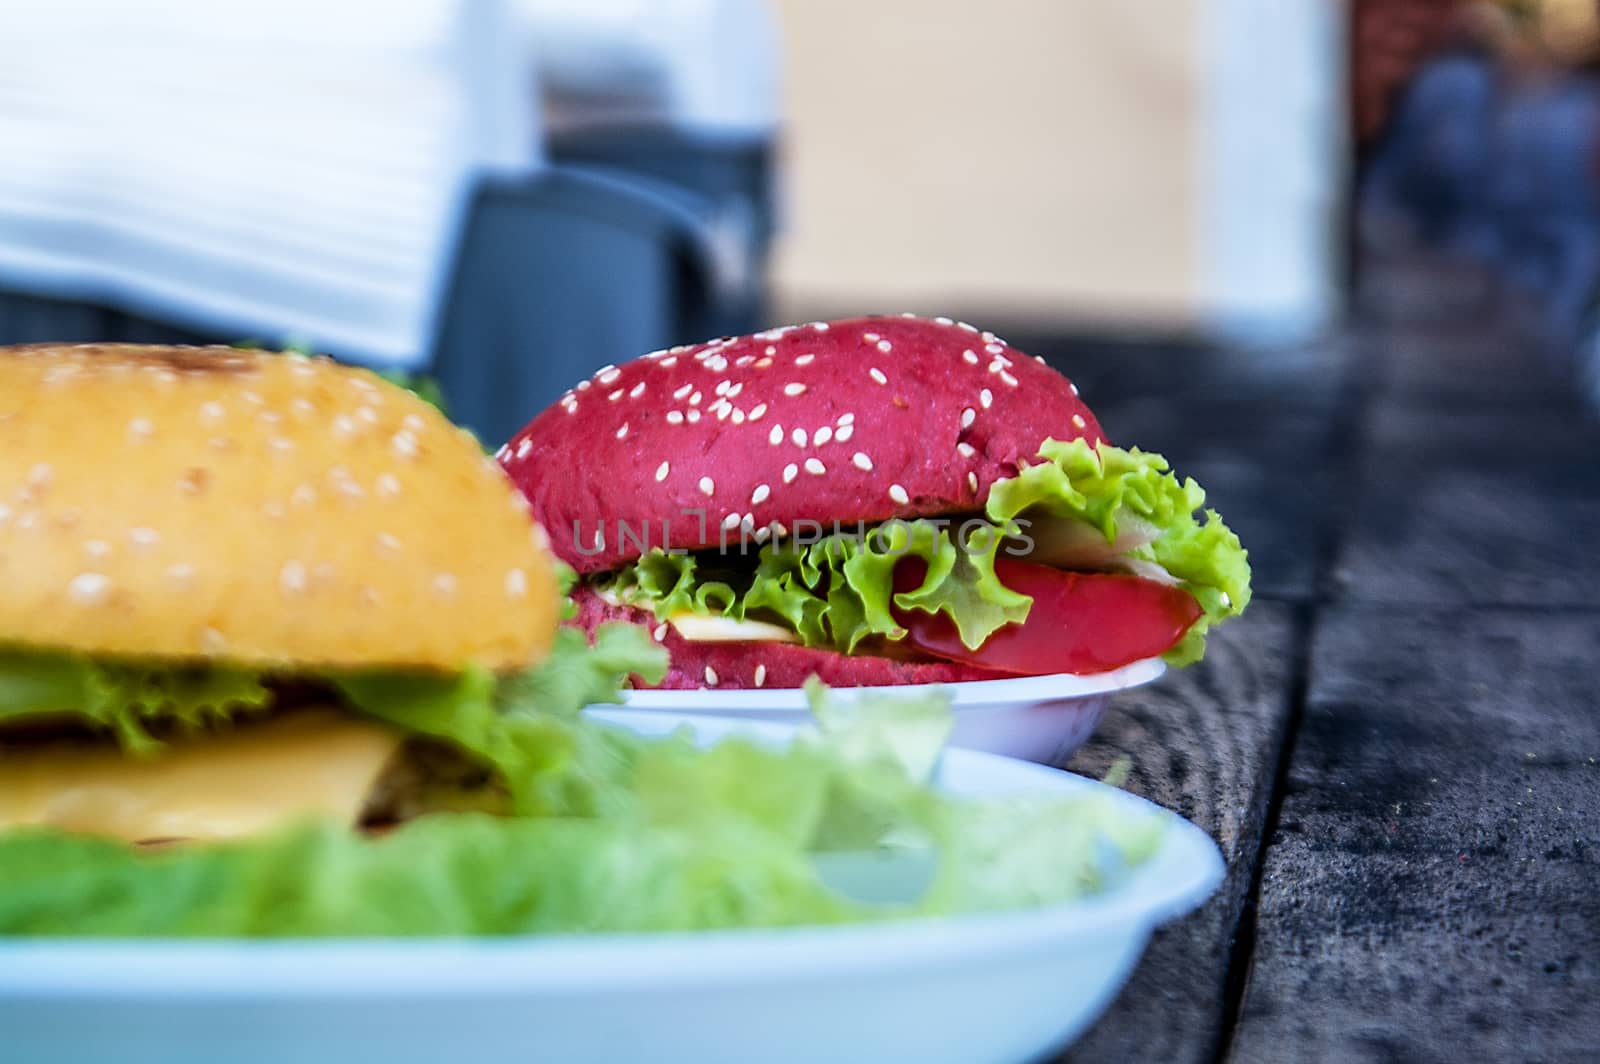 lying a tasty red and yellow burger with salad and sesame  